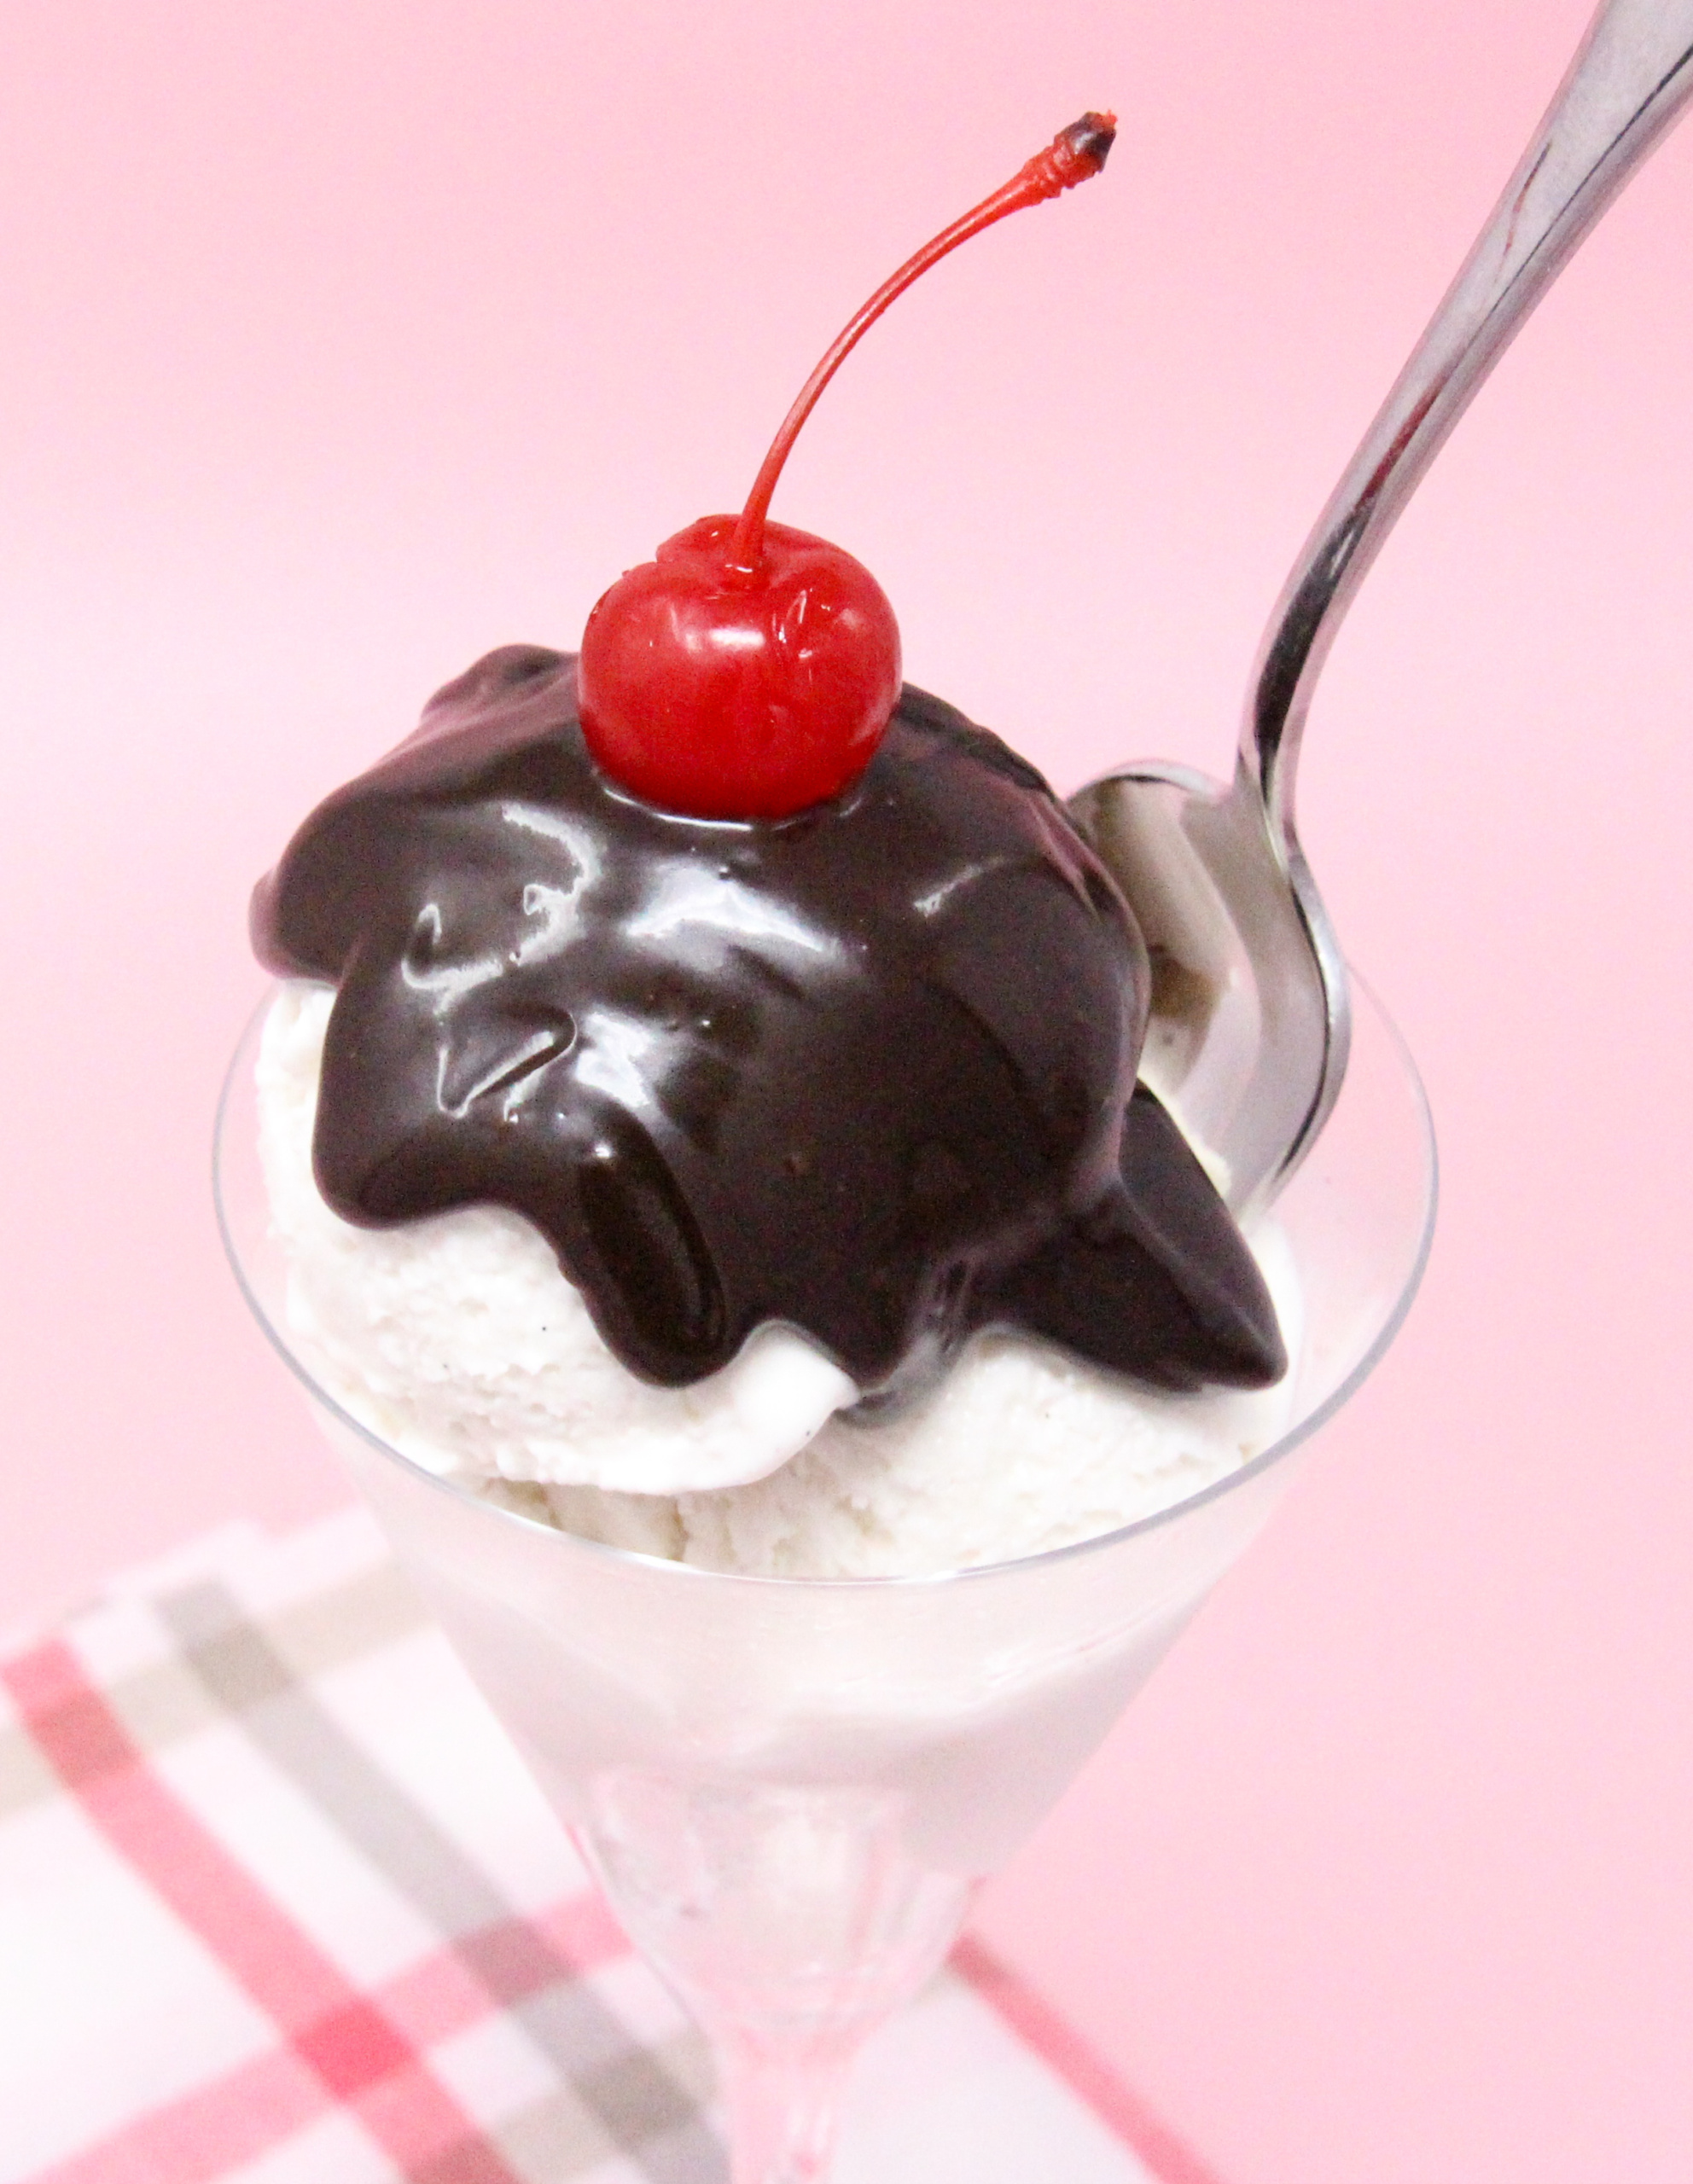 Fast and Fabulous Hot Fudge Sauce requires just a few simple ingredients and a few minutes to create an utterly delectable topping for your favorite ice cream! Recipe shared with permission granted by Meri Allen, author of FATAL FUDGE SWIRL. 